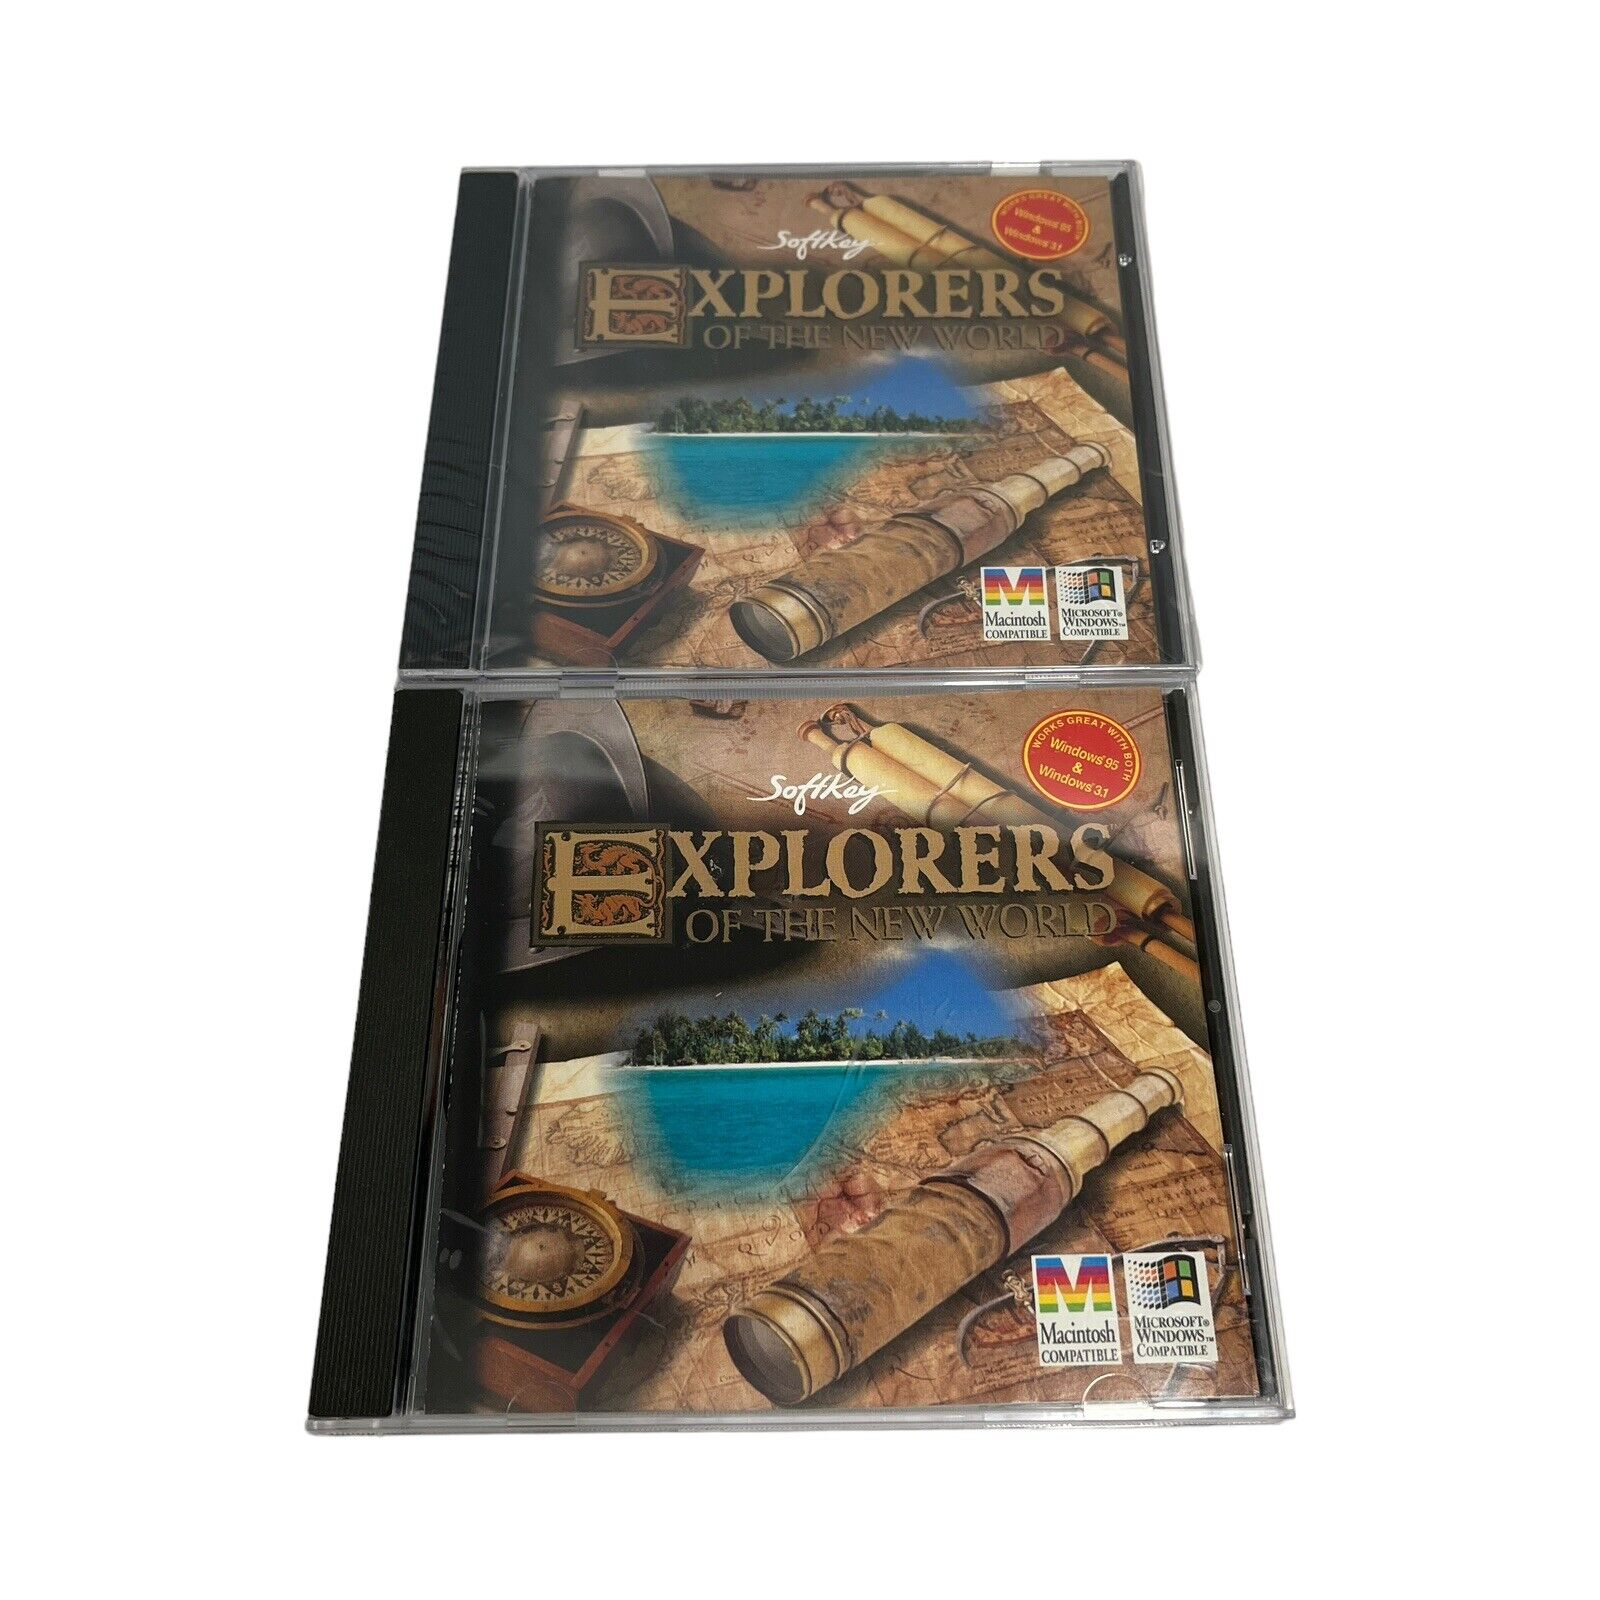 Explorers of the New World PC, CD-Rom 1995 Softkey Media LOT OF TWO